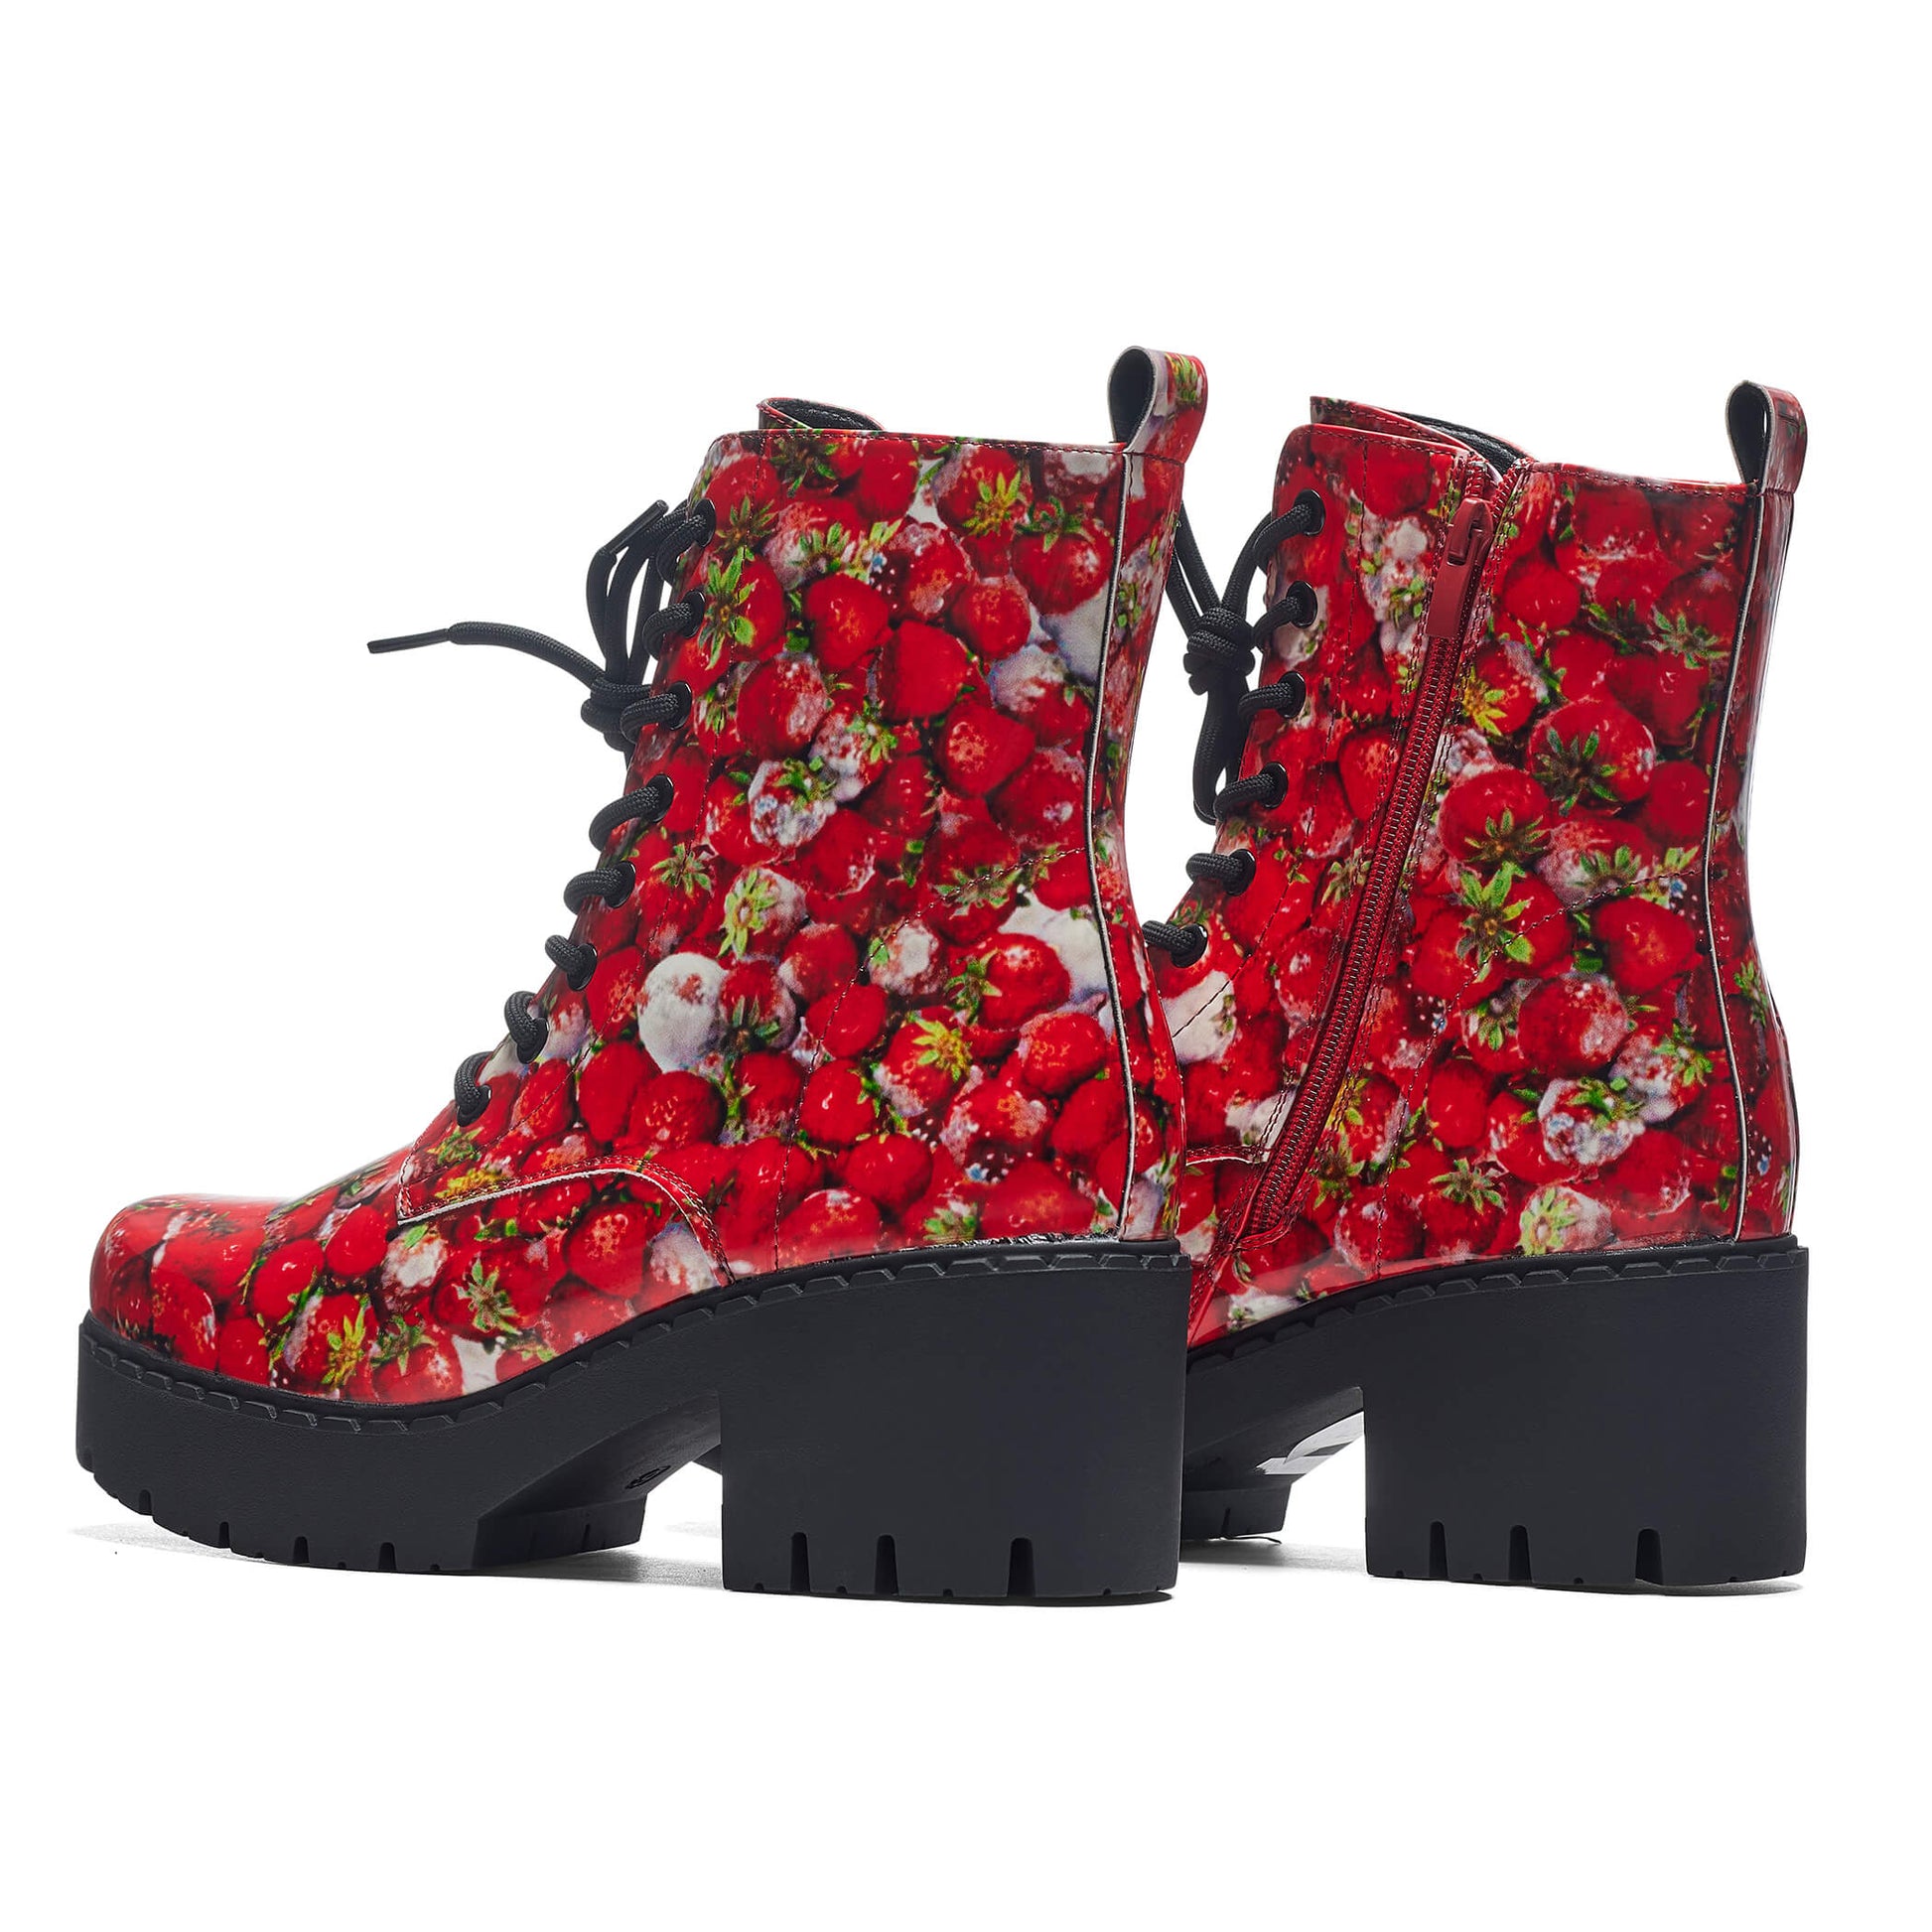 Frozen Strawberries Switch Boots - Ankle Boots - KOI Footwear - Red - Back View